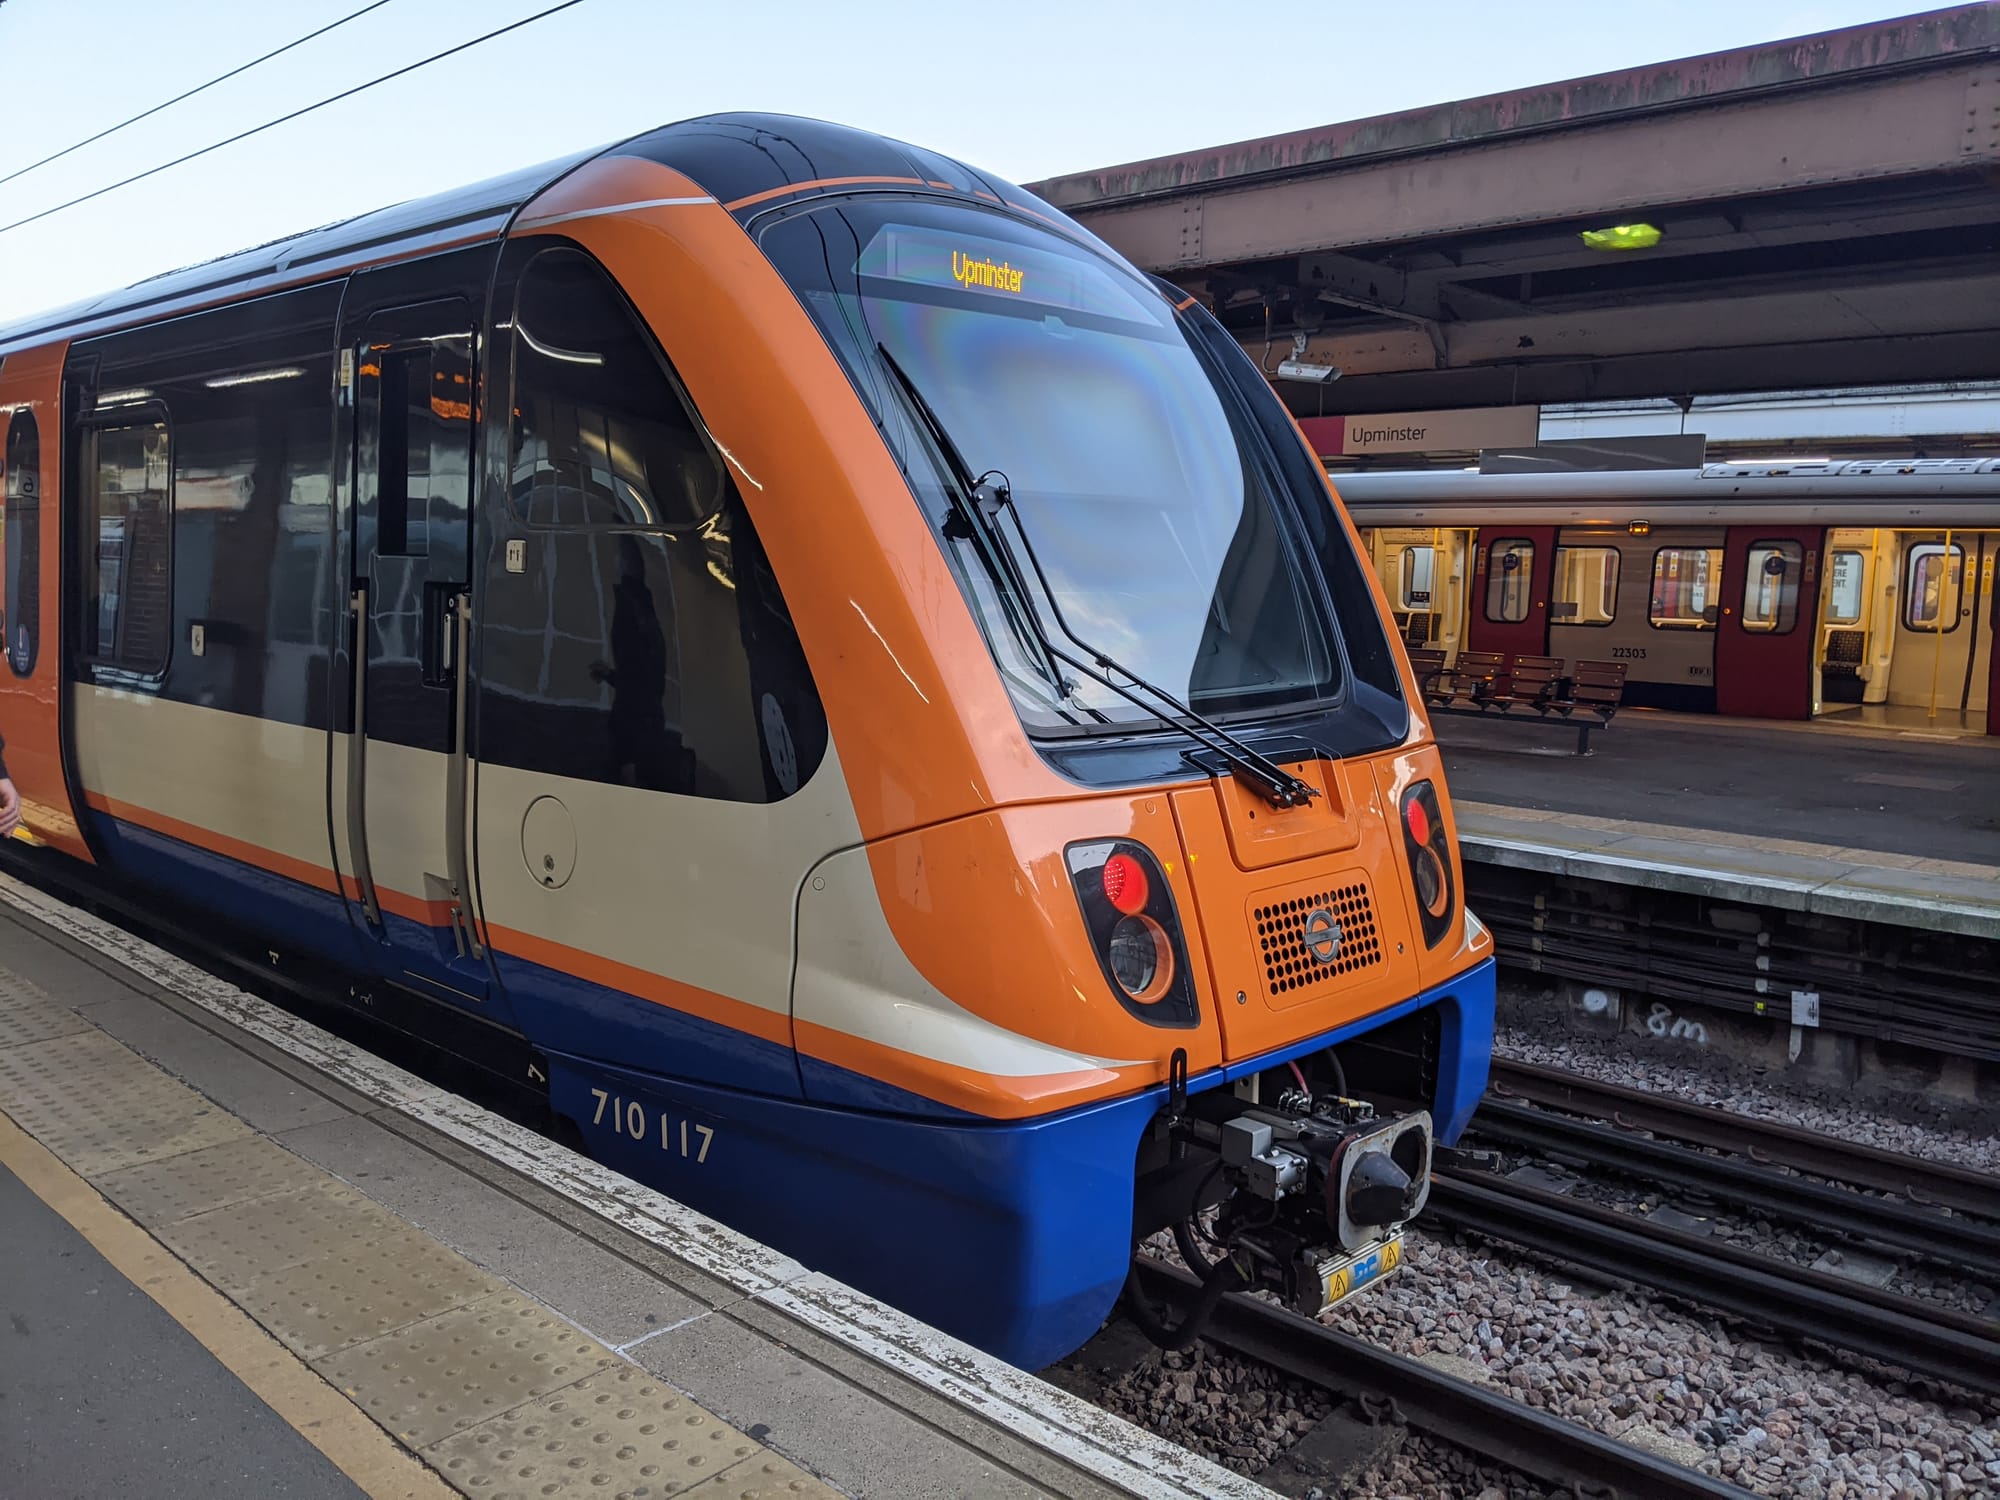 A London Overground train is stationary at a platform. The red rear lights are illuminated on the back of the train. The back of the train is painted bright orange around the outside of a large window. The bottom part of the train is painted blue.